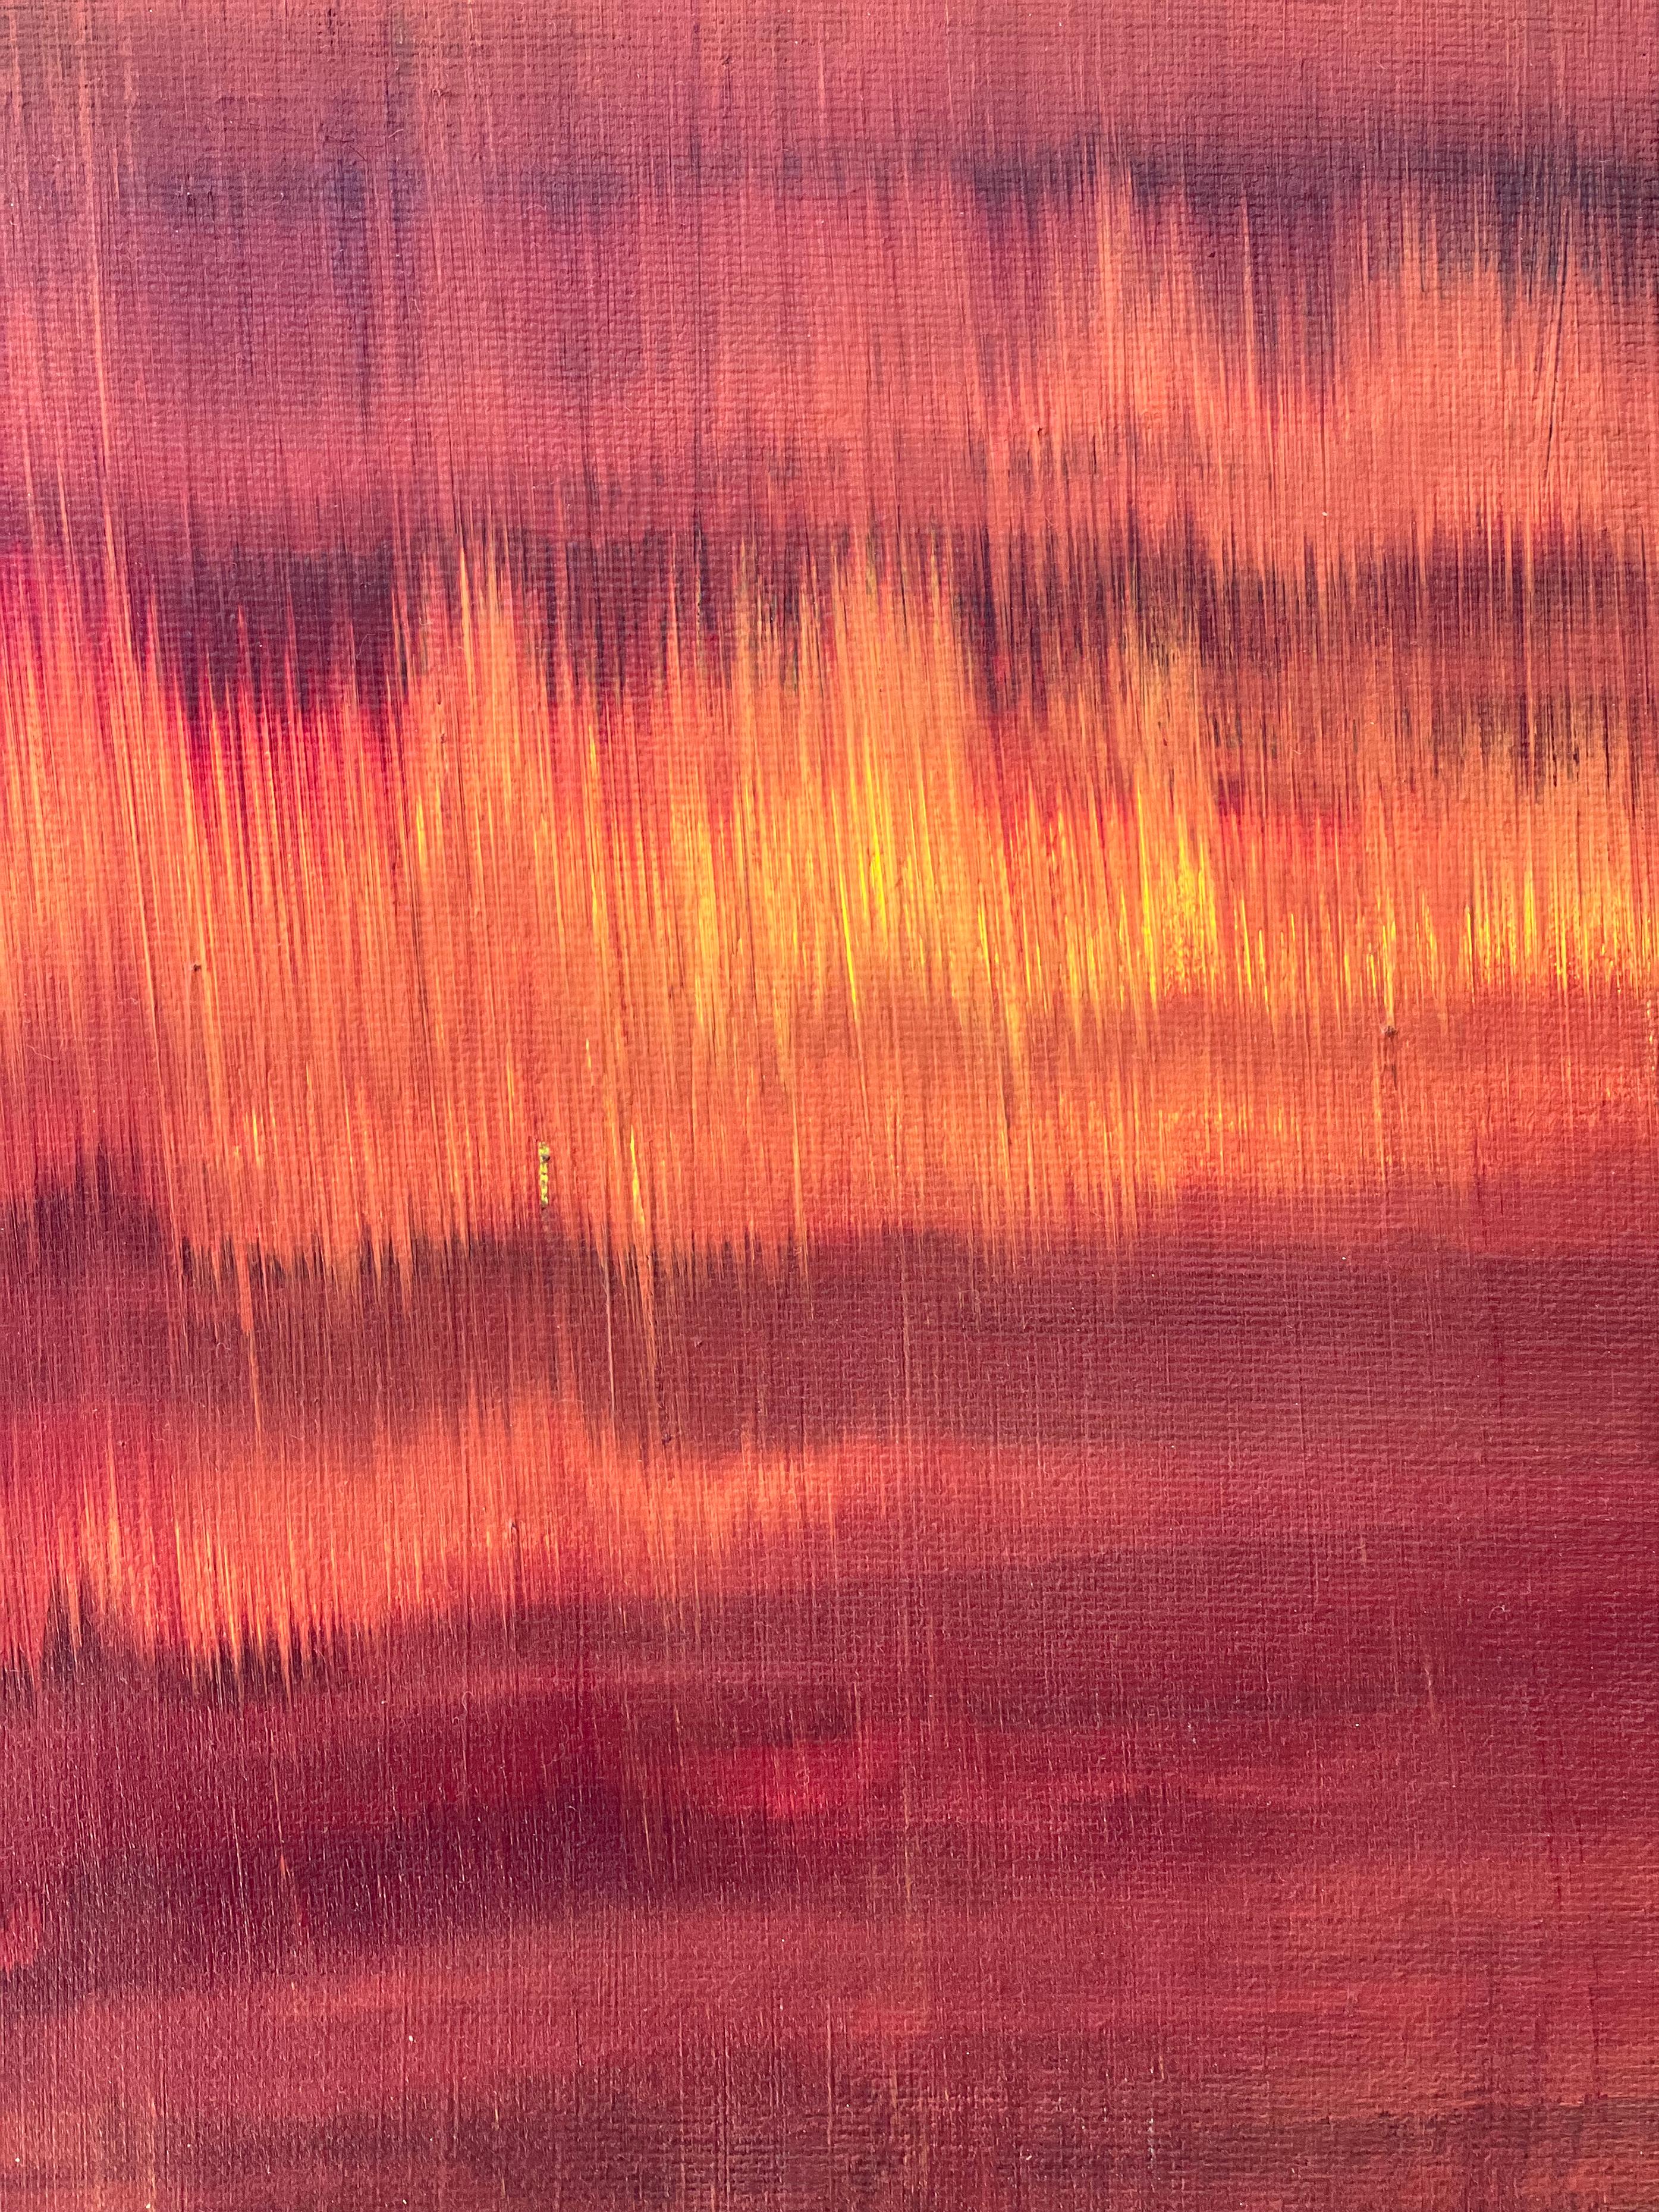 After the Fires - acrylic on canvas - Brown Abstract Painting by Nina Weintraub